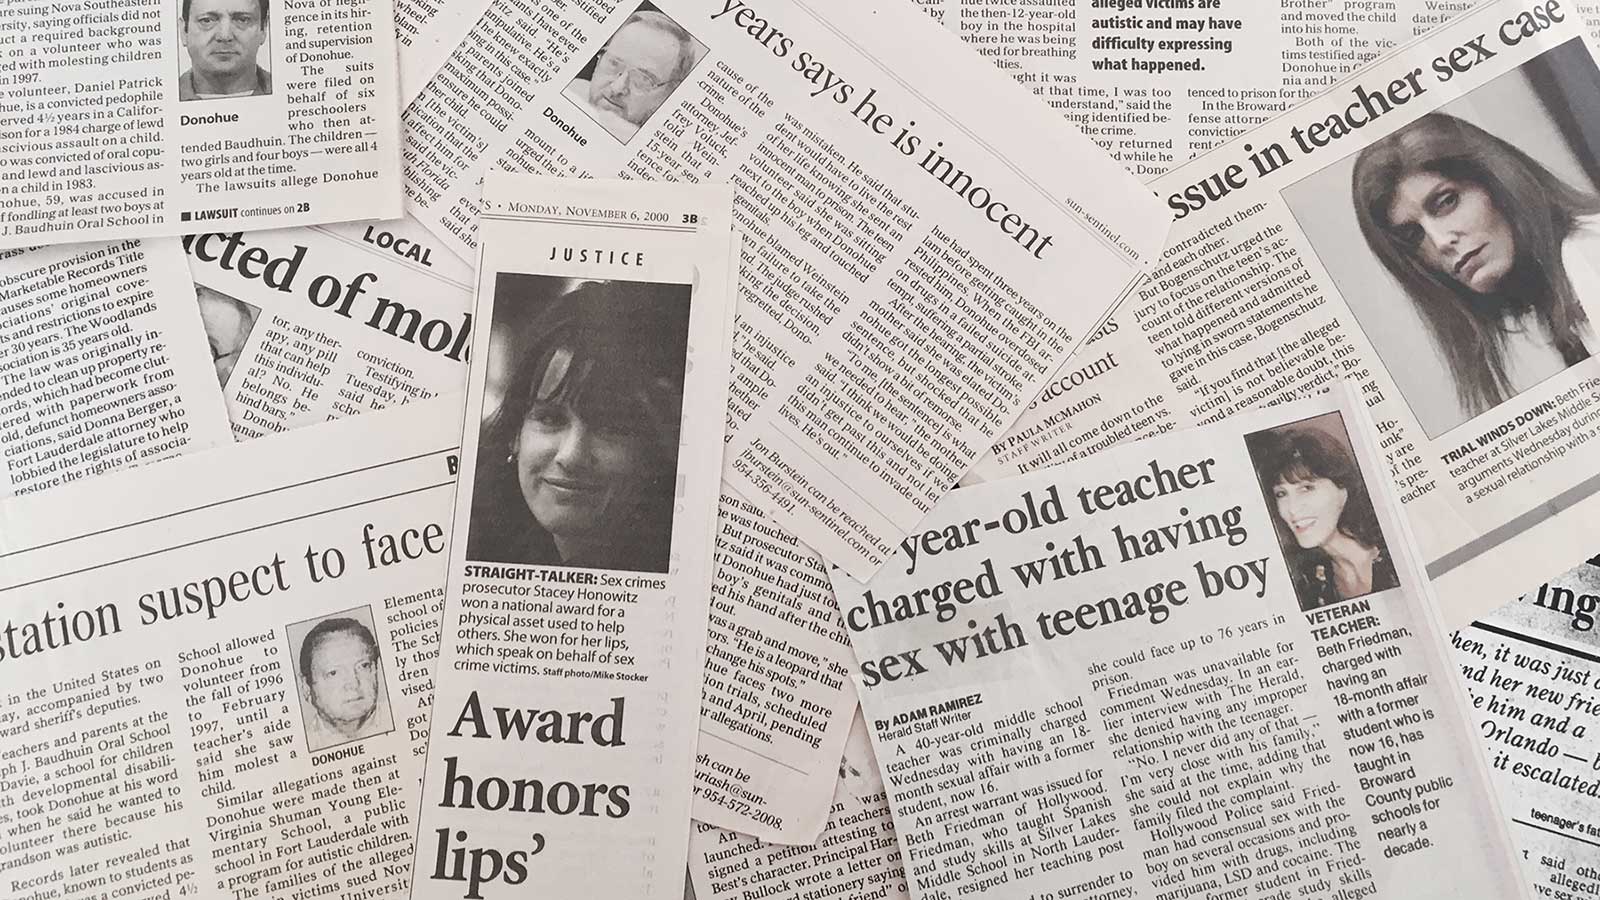 Newspaper aricles by and for Stacey Honowitz